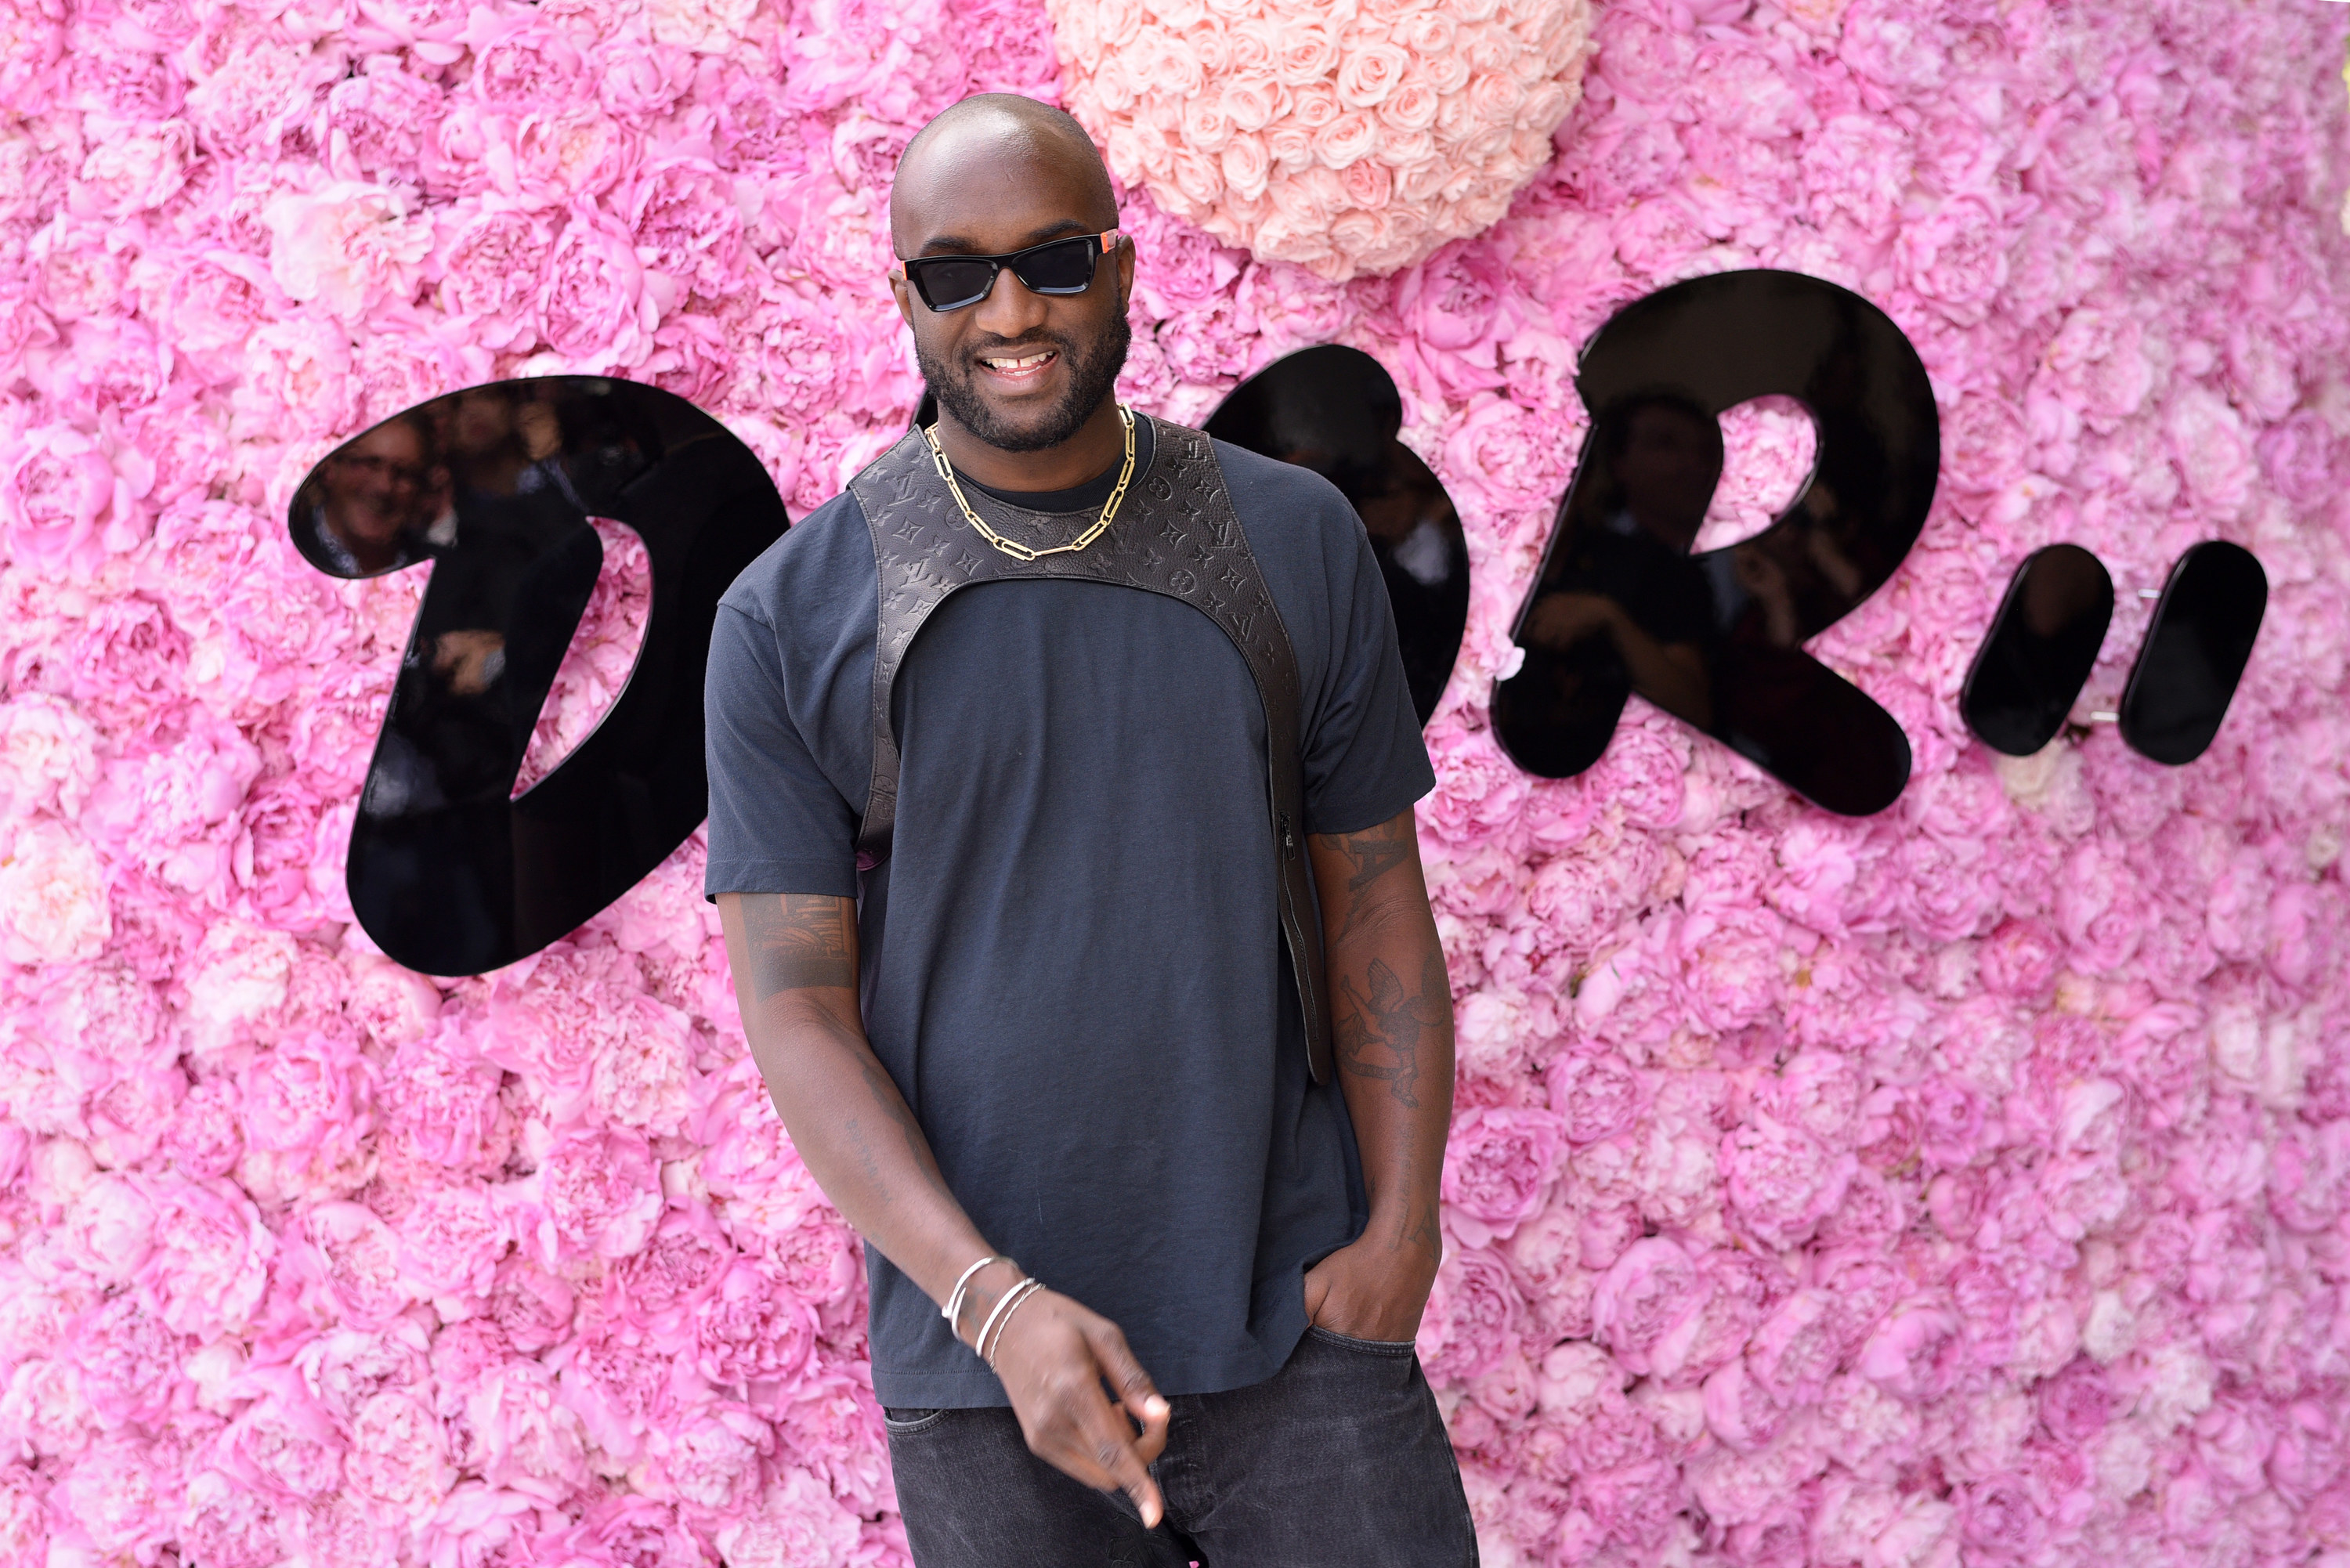 Off-White and Louis Vuitton Designer Virgil Abloh Catches Social Media Heat  for Perceived $50 Donation to Black Lives Matter: Later Apologizes and  Clarifies – Fashion Bomb Daily